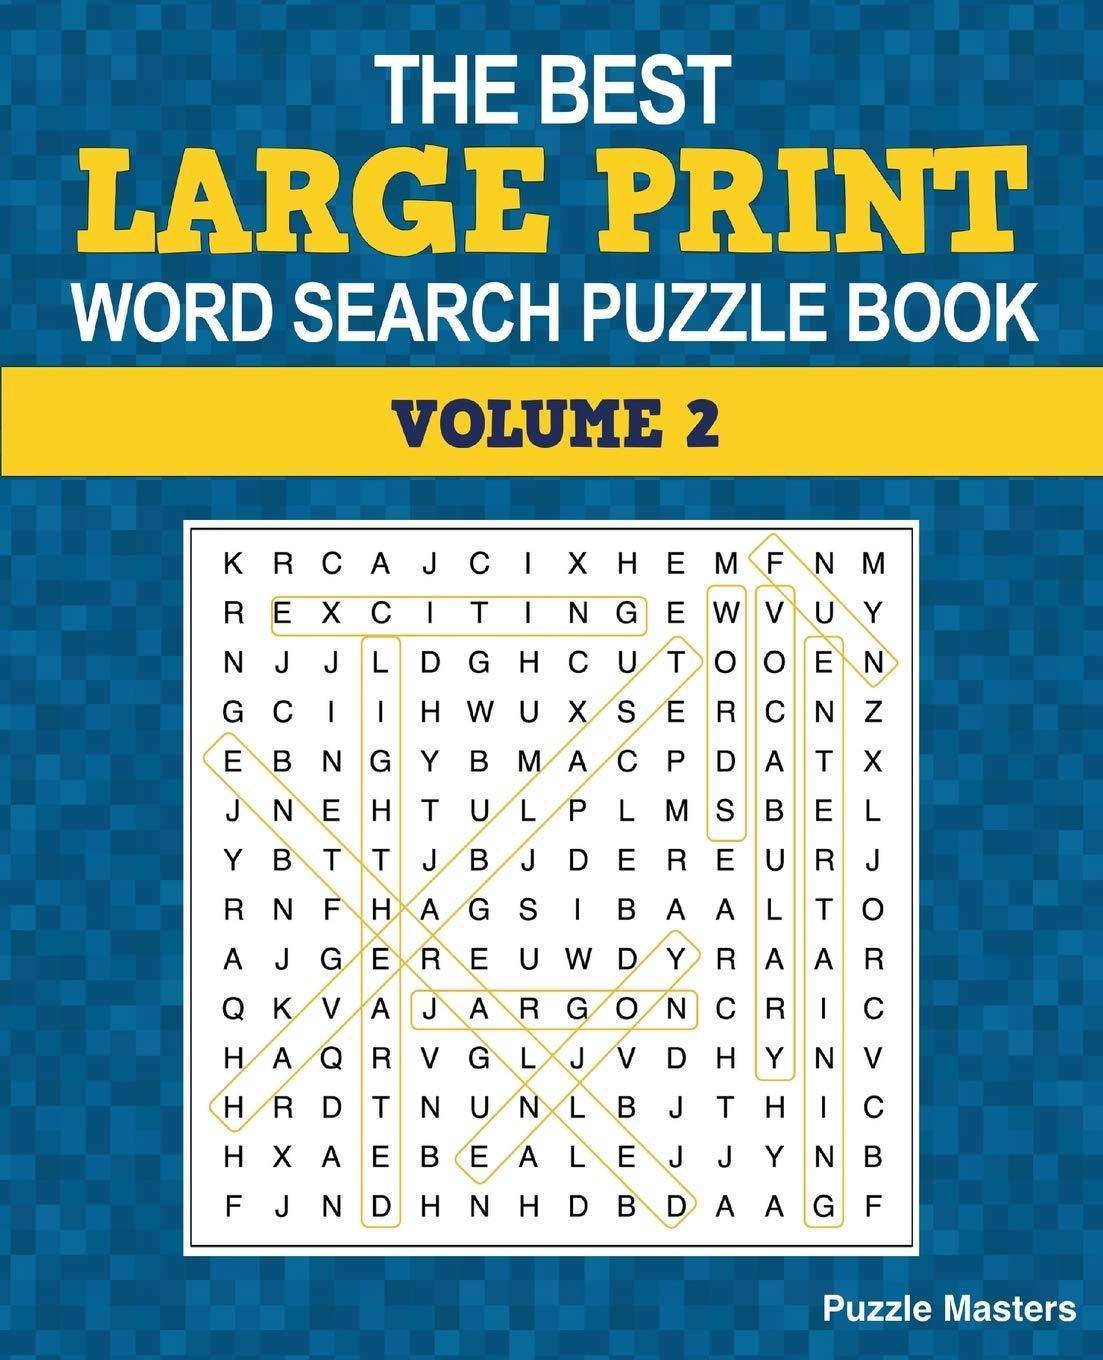 Best Large Print Word Search Puzzle Book, Volume 2: A Collection - SureShot Books Publishing LLC